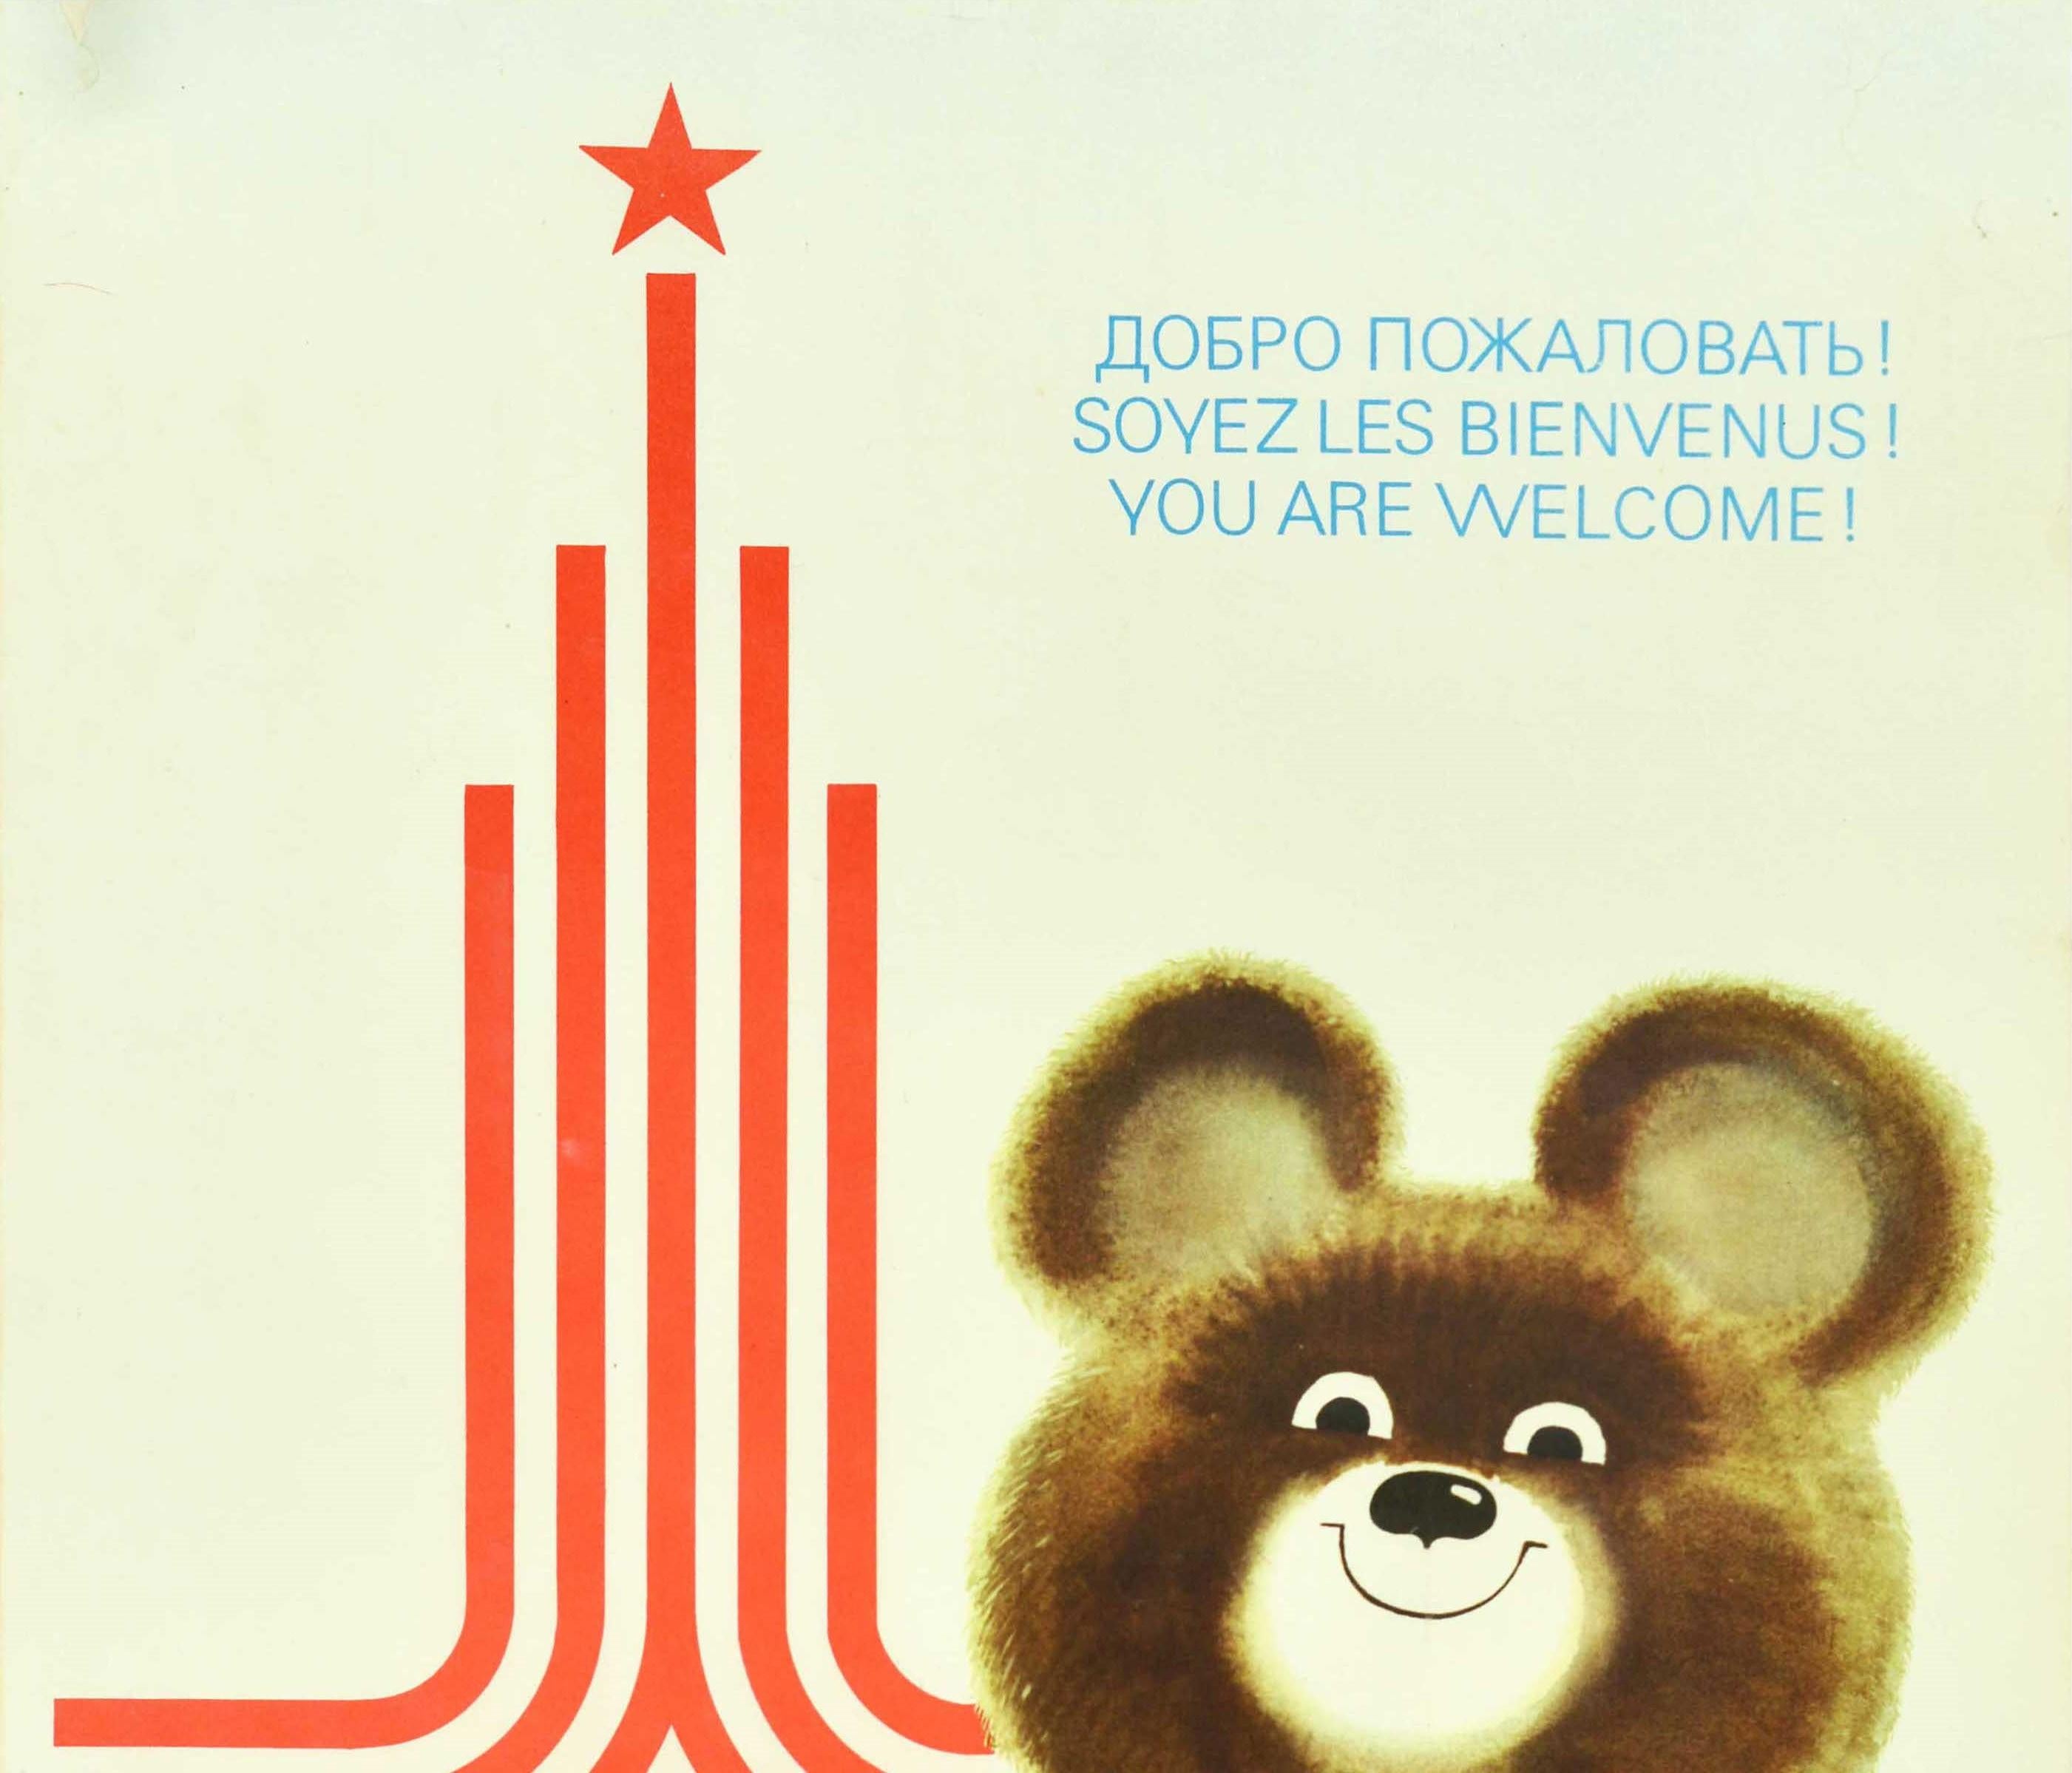 Original vintage Soviet sport poster for the 22nd Summer Olympic Games (Games of the XXII Olympiad) in 1980 held in Moscow Russia featuring a fun and colourful illustration depicting a smiling bear - Misha the Moscow Olympic Games mascot - wearing